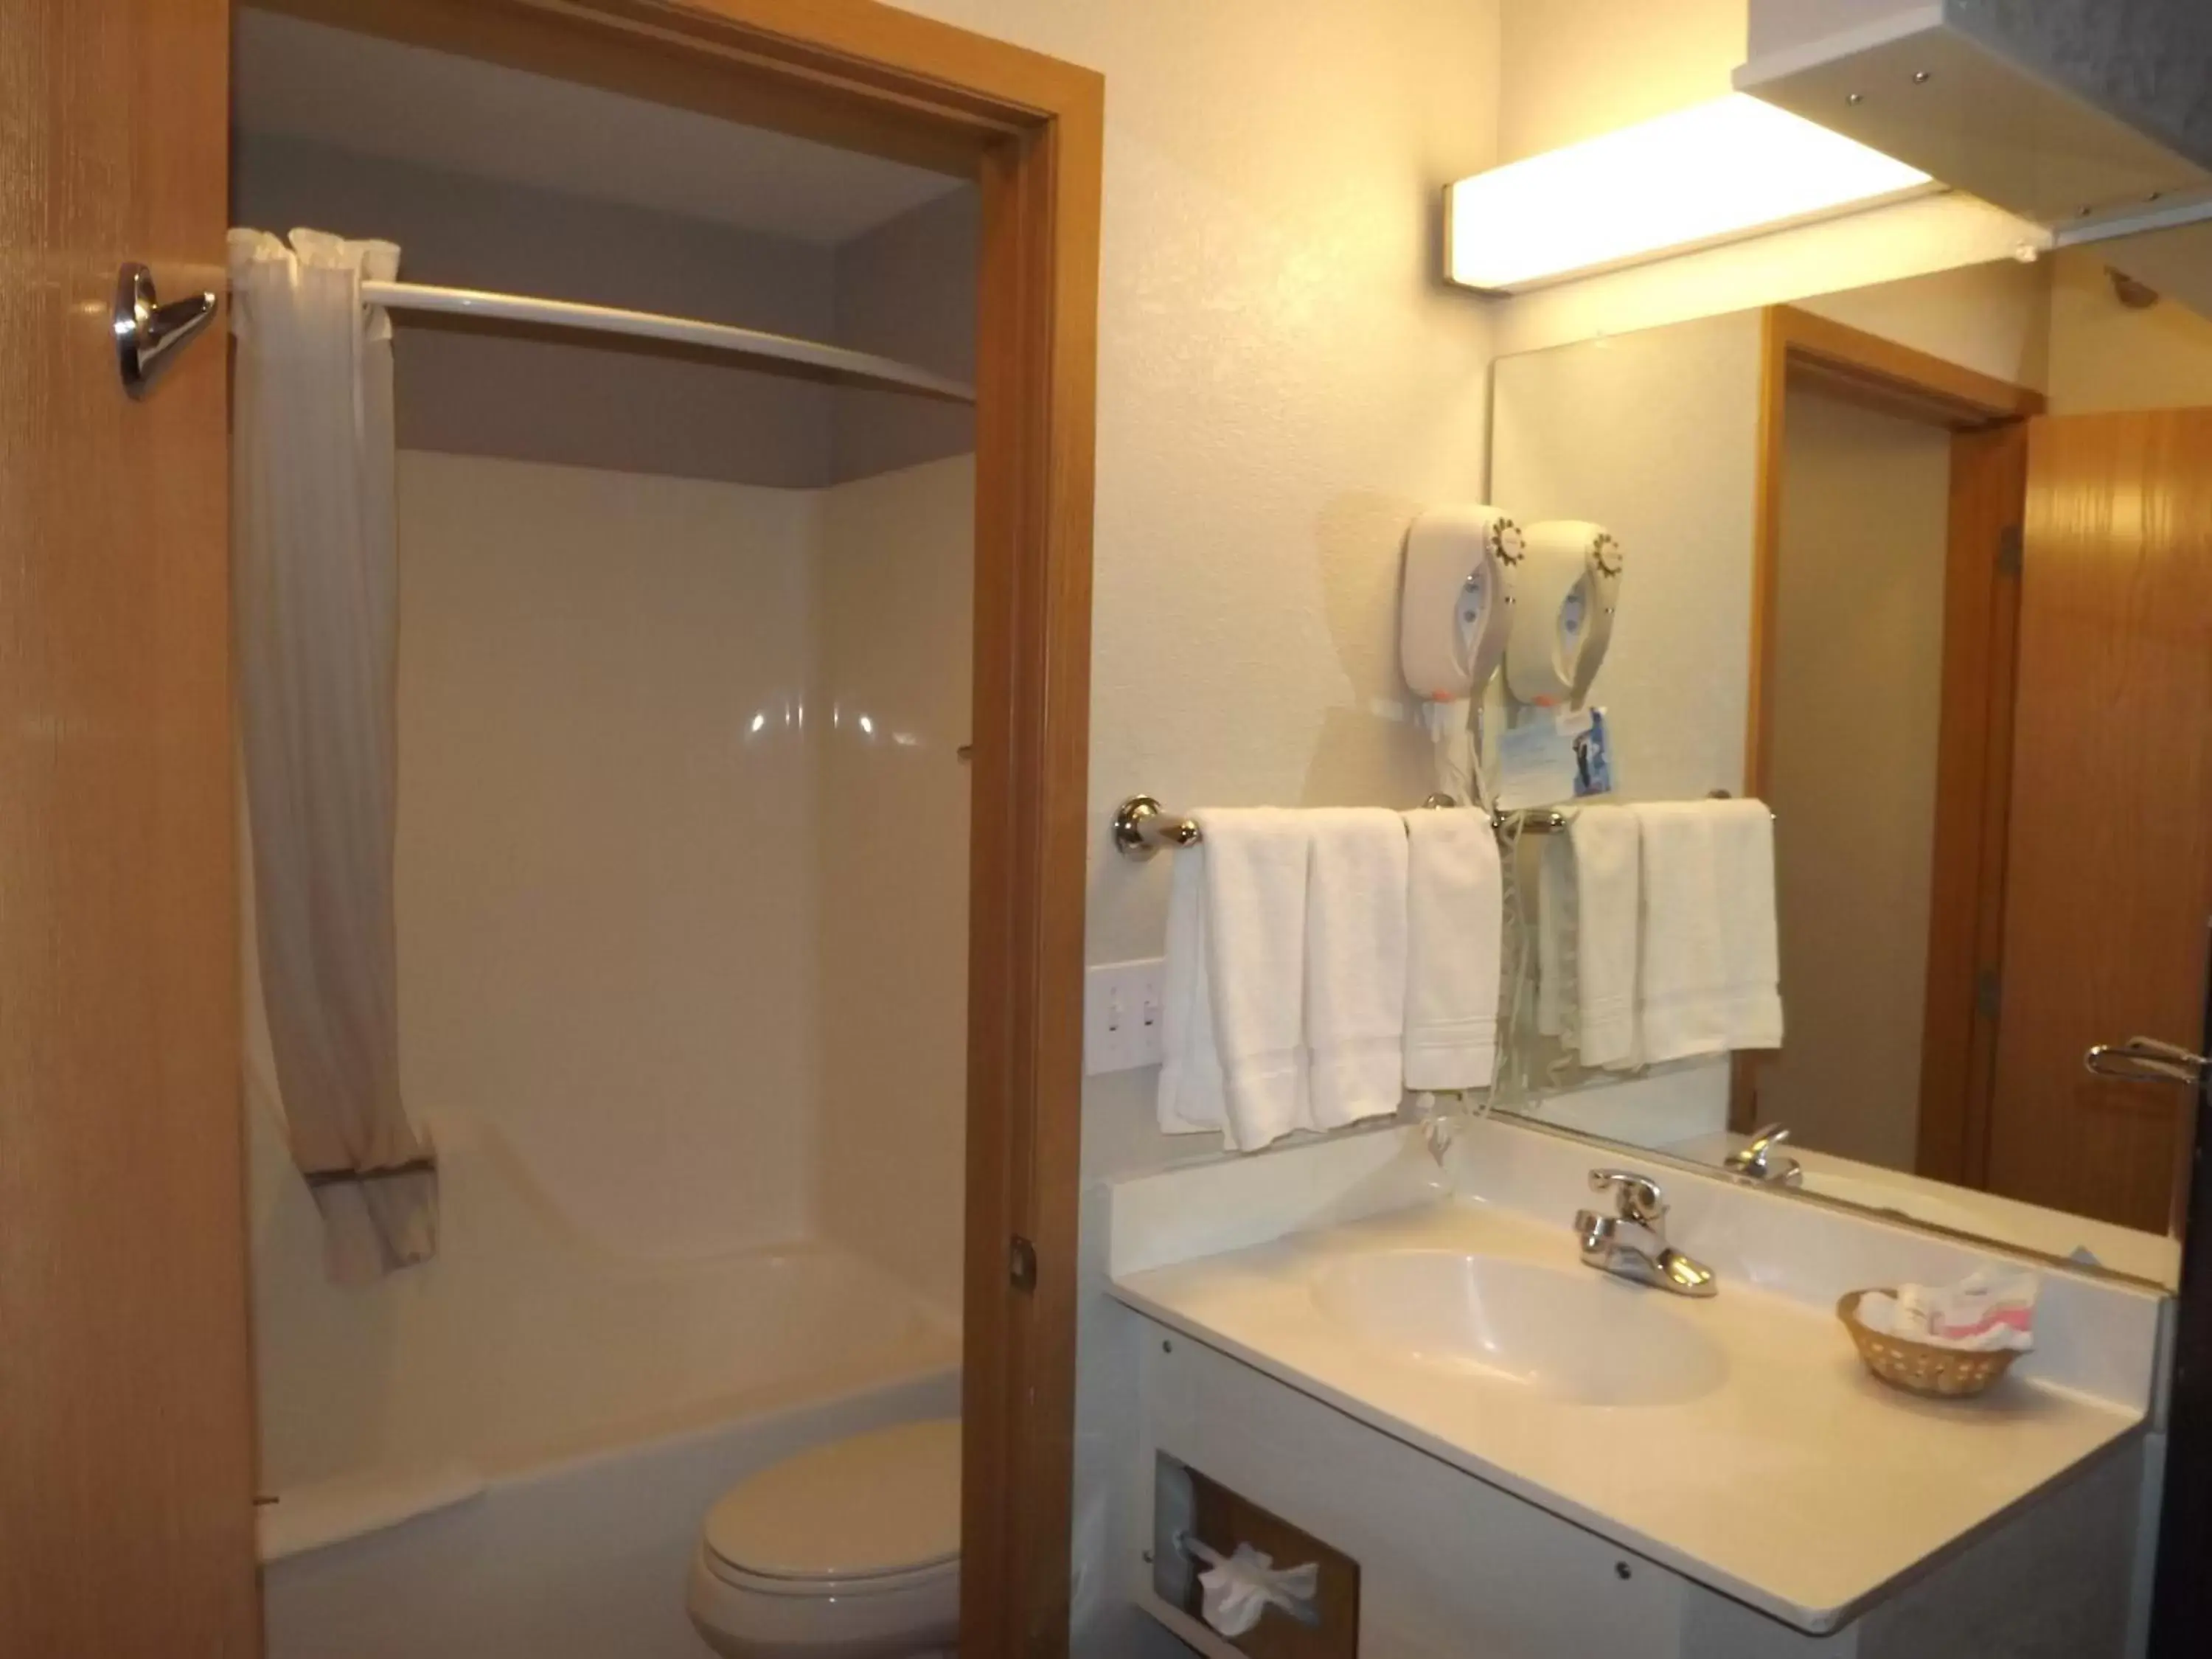 Bathroom in MICROTEL Inn and Suites - Ames